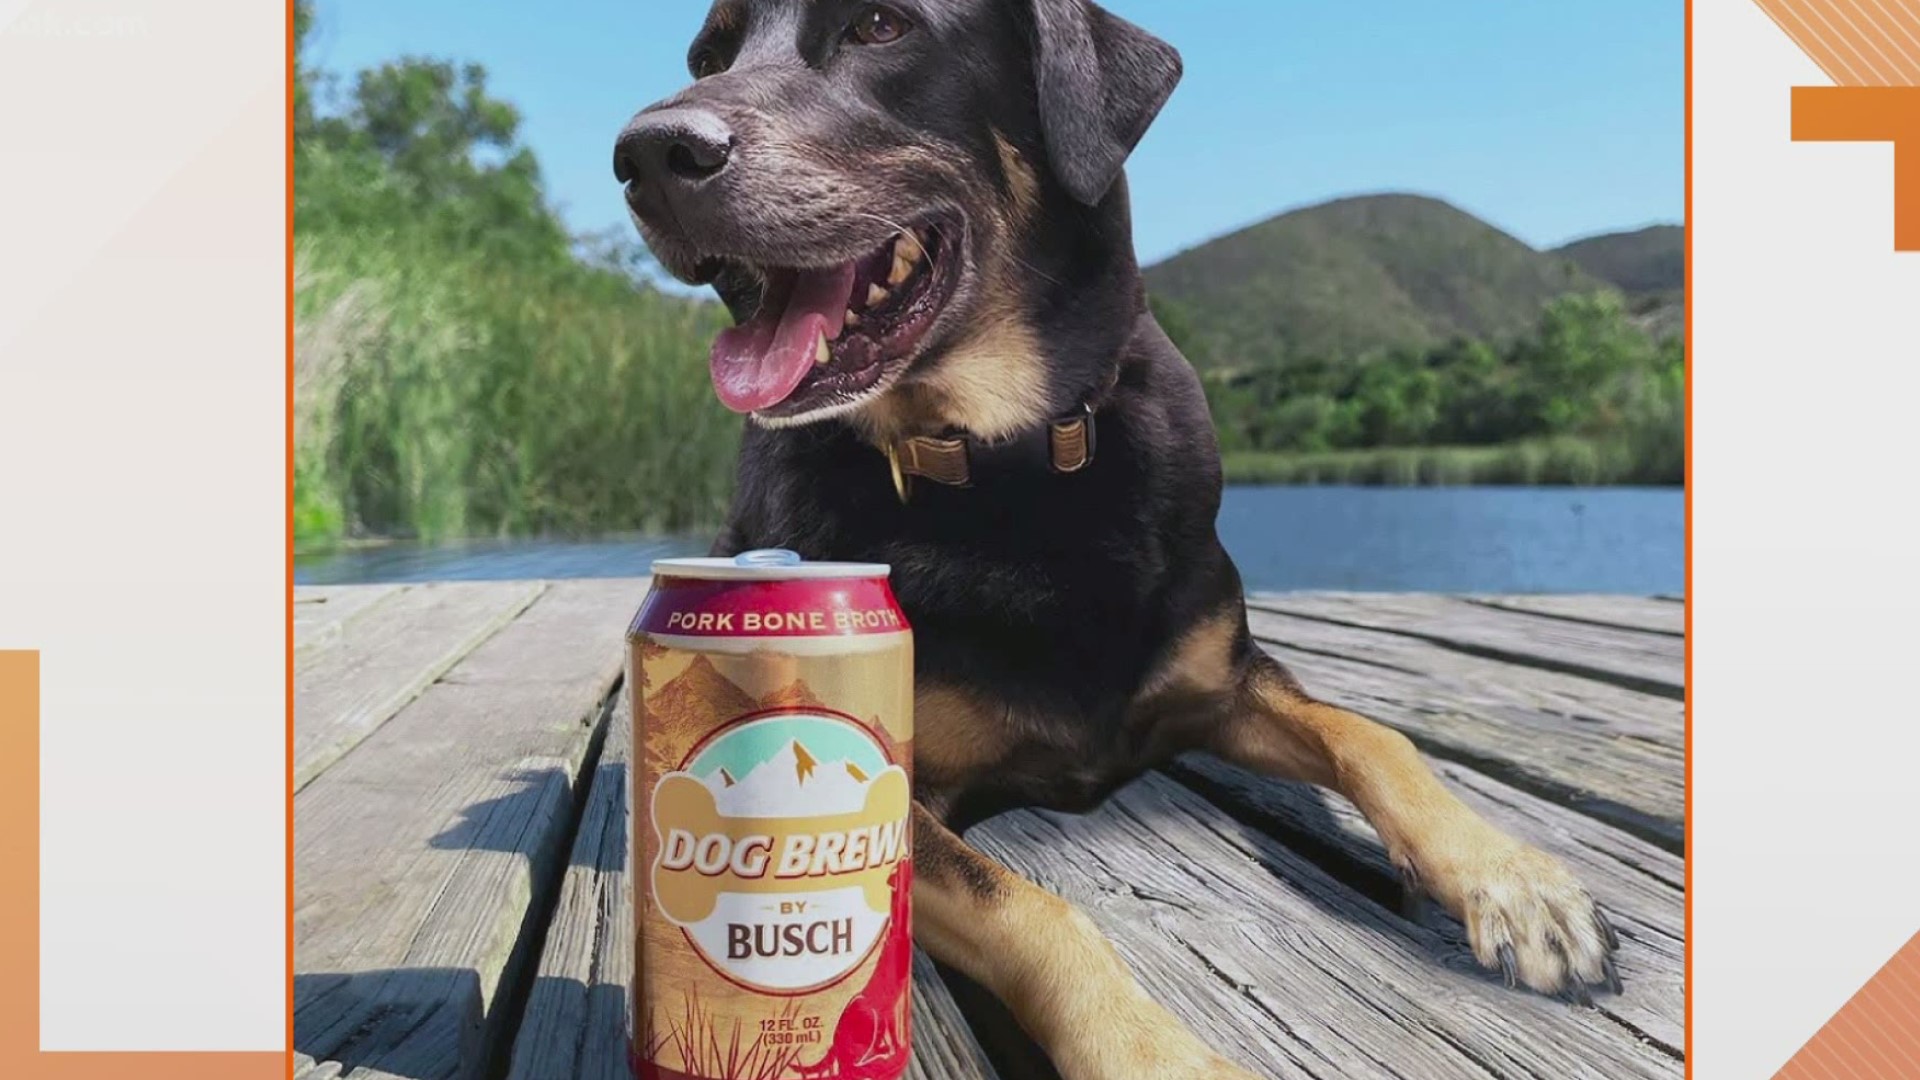 Busch Beer is expanding its Dog Brew line and it can earn your dog some big bucks.